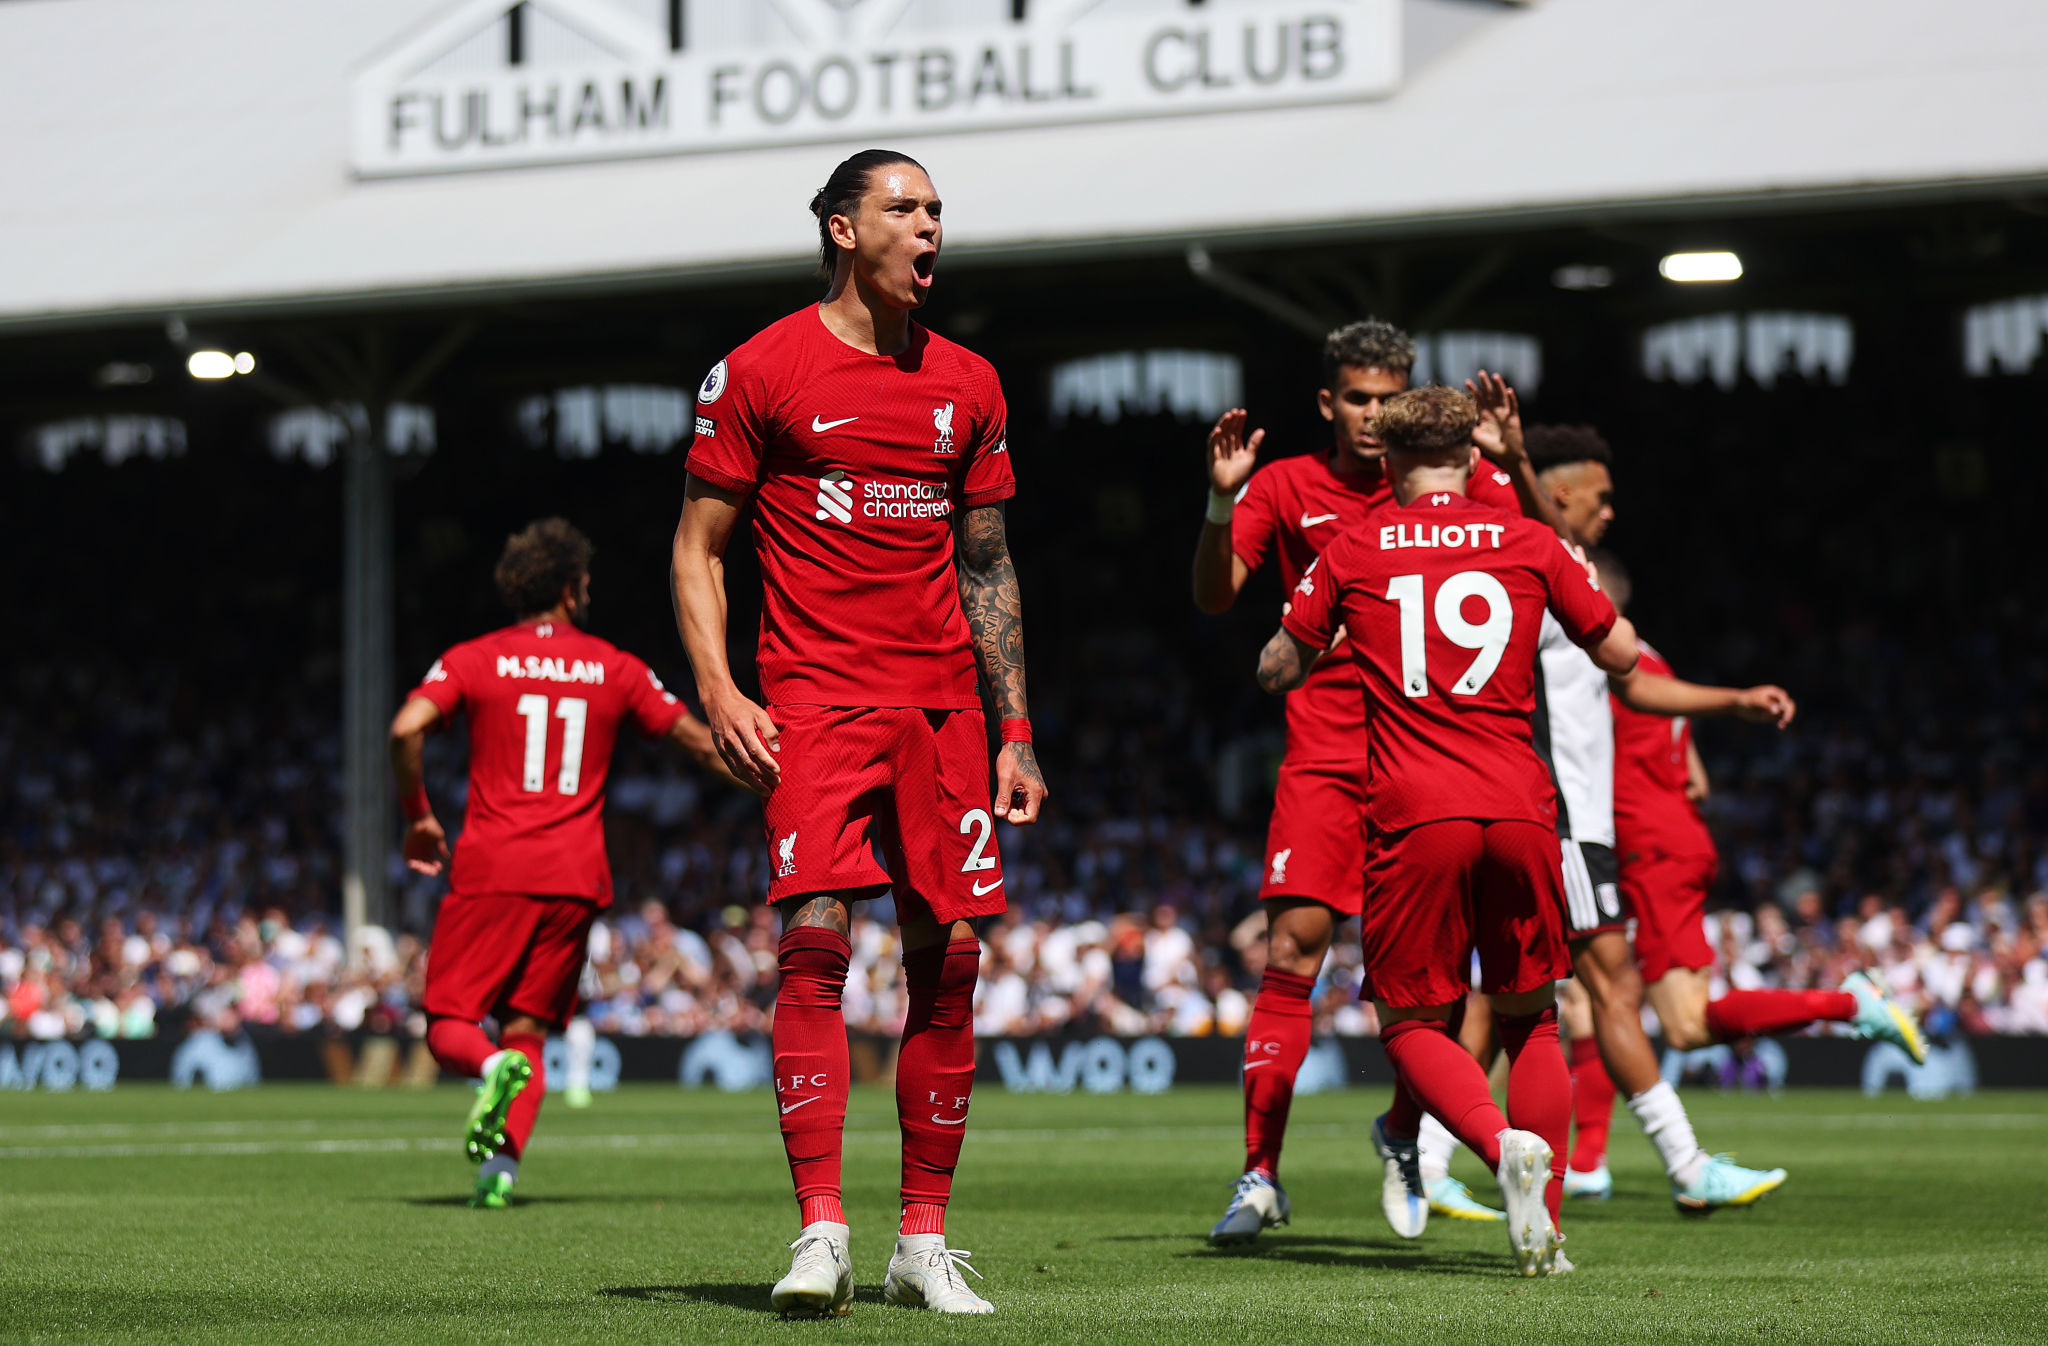 Fulham vs Liverpool Highlights: FUL 2-2 LIV, Mohamed Salah's equaliser helps Liverpool claim a 2-2 draw at Craven Cottage, Mitrovic and Salah with the goals, Check Fulham vs Liverpool HIGHLIGHTS